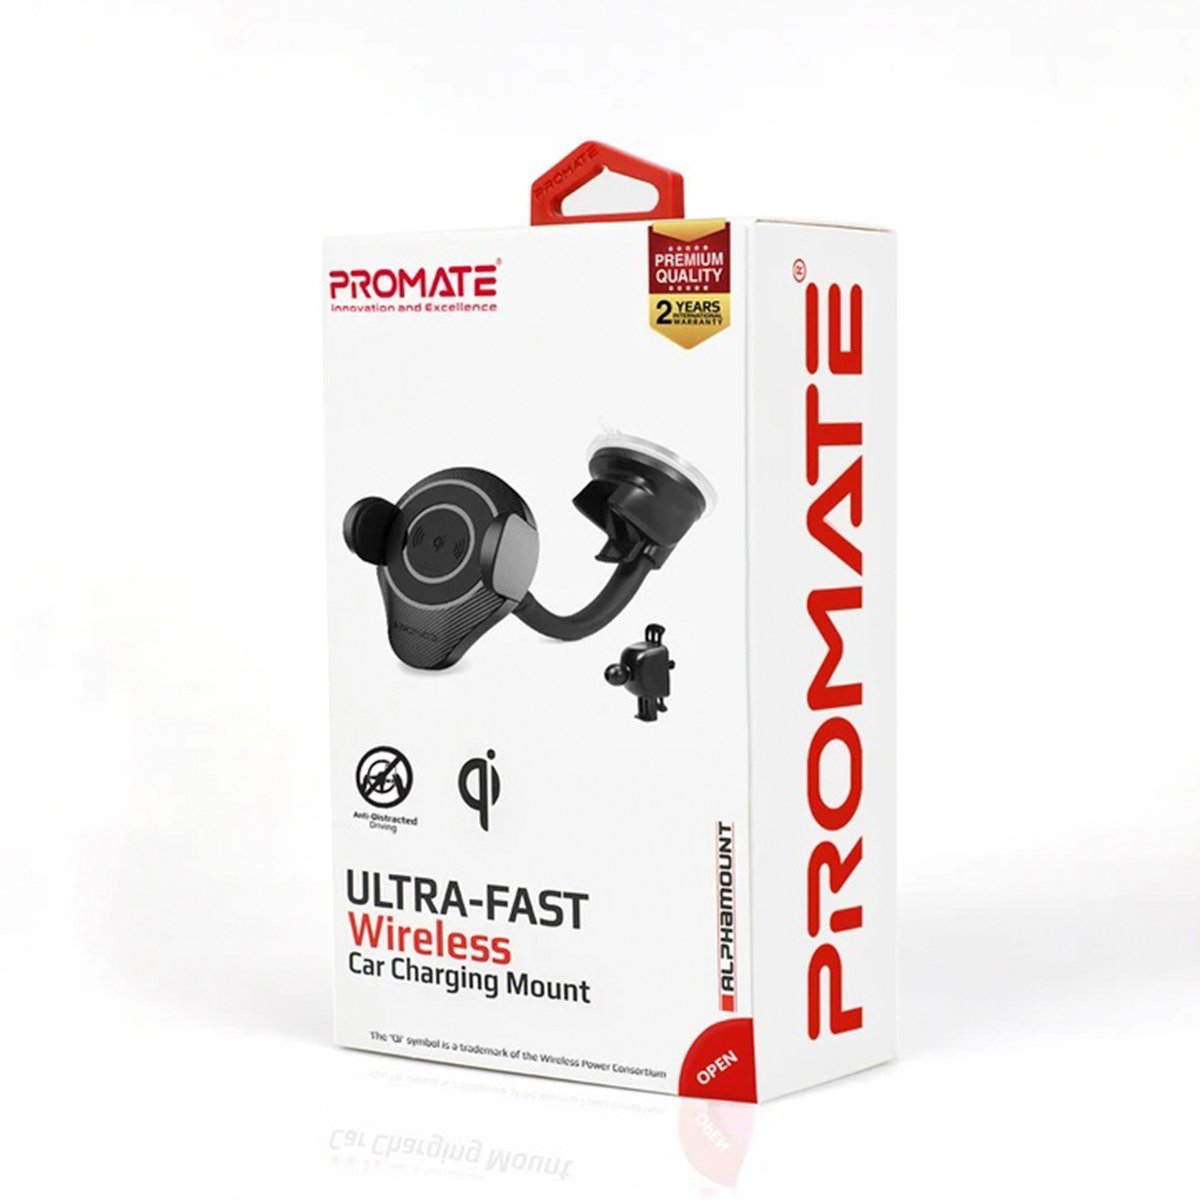 Promate Ultra-Fast Wireless Car Charging Mount Alpha